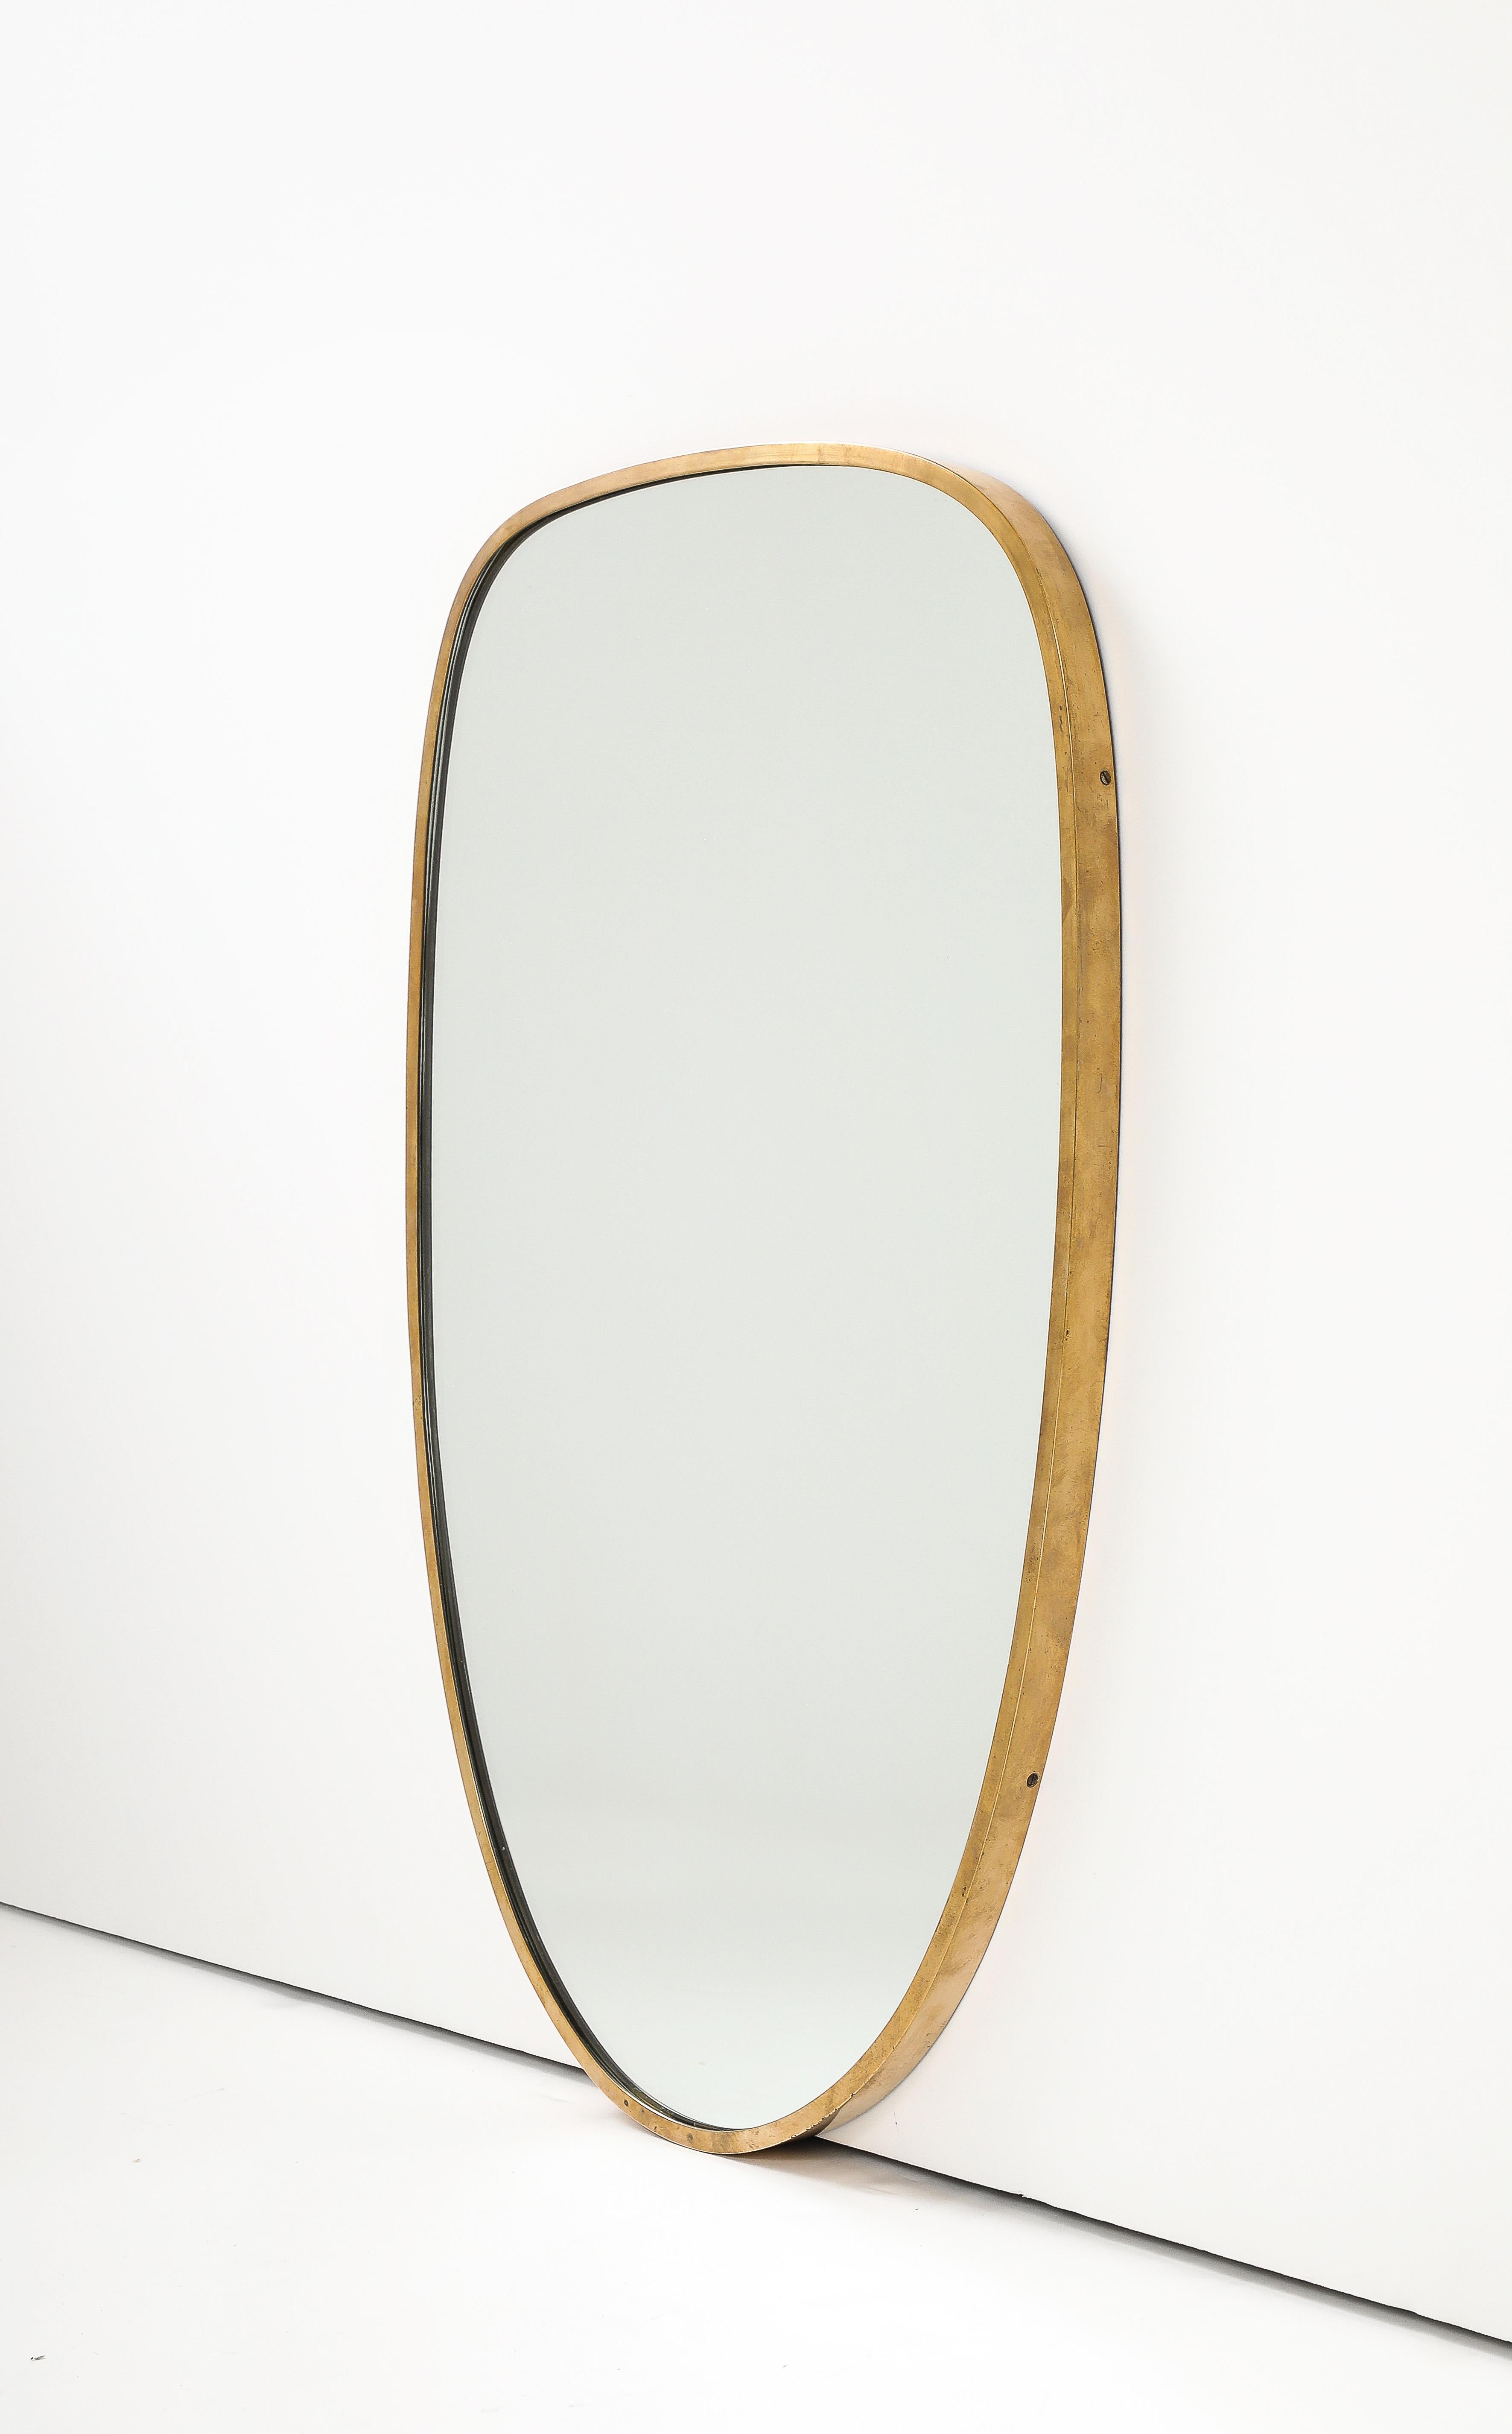 Italian Modernist Mirror with Brass Frame, Italy, c. 1950 For Sale 3